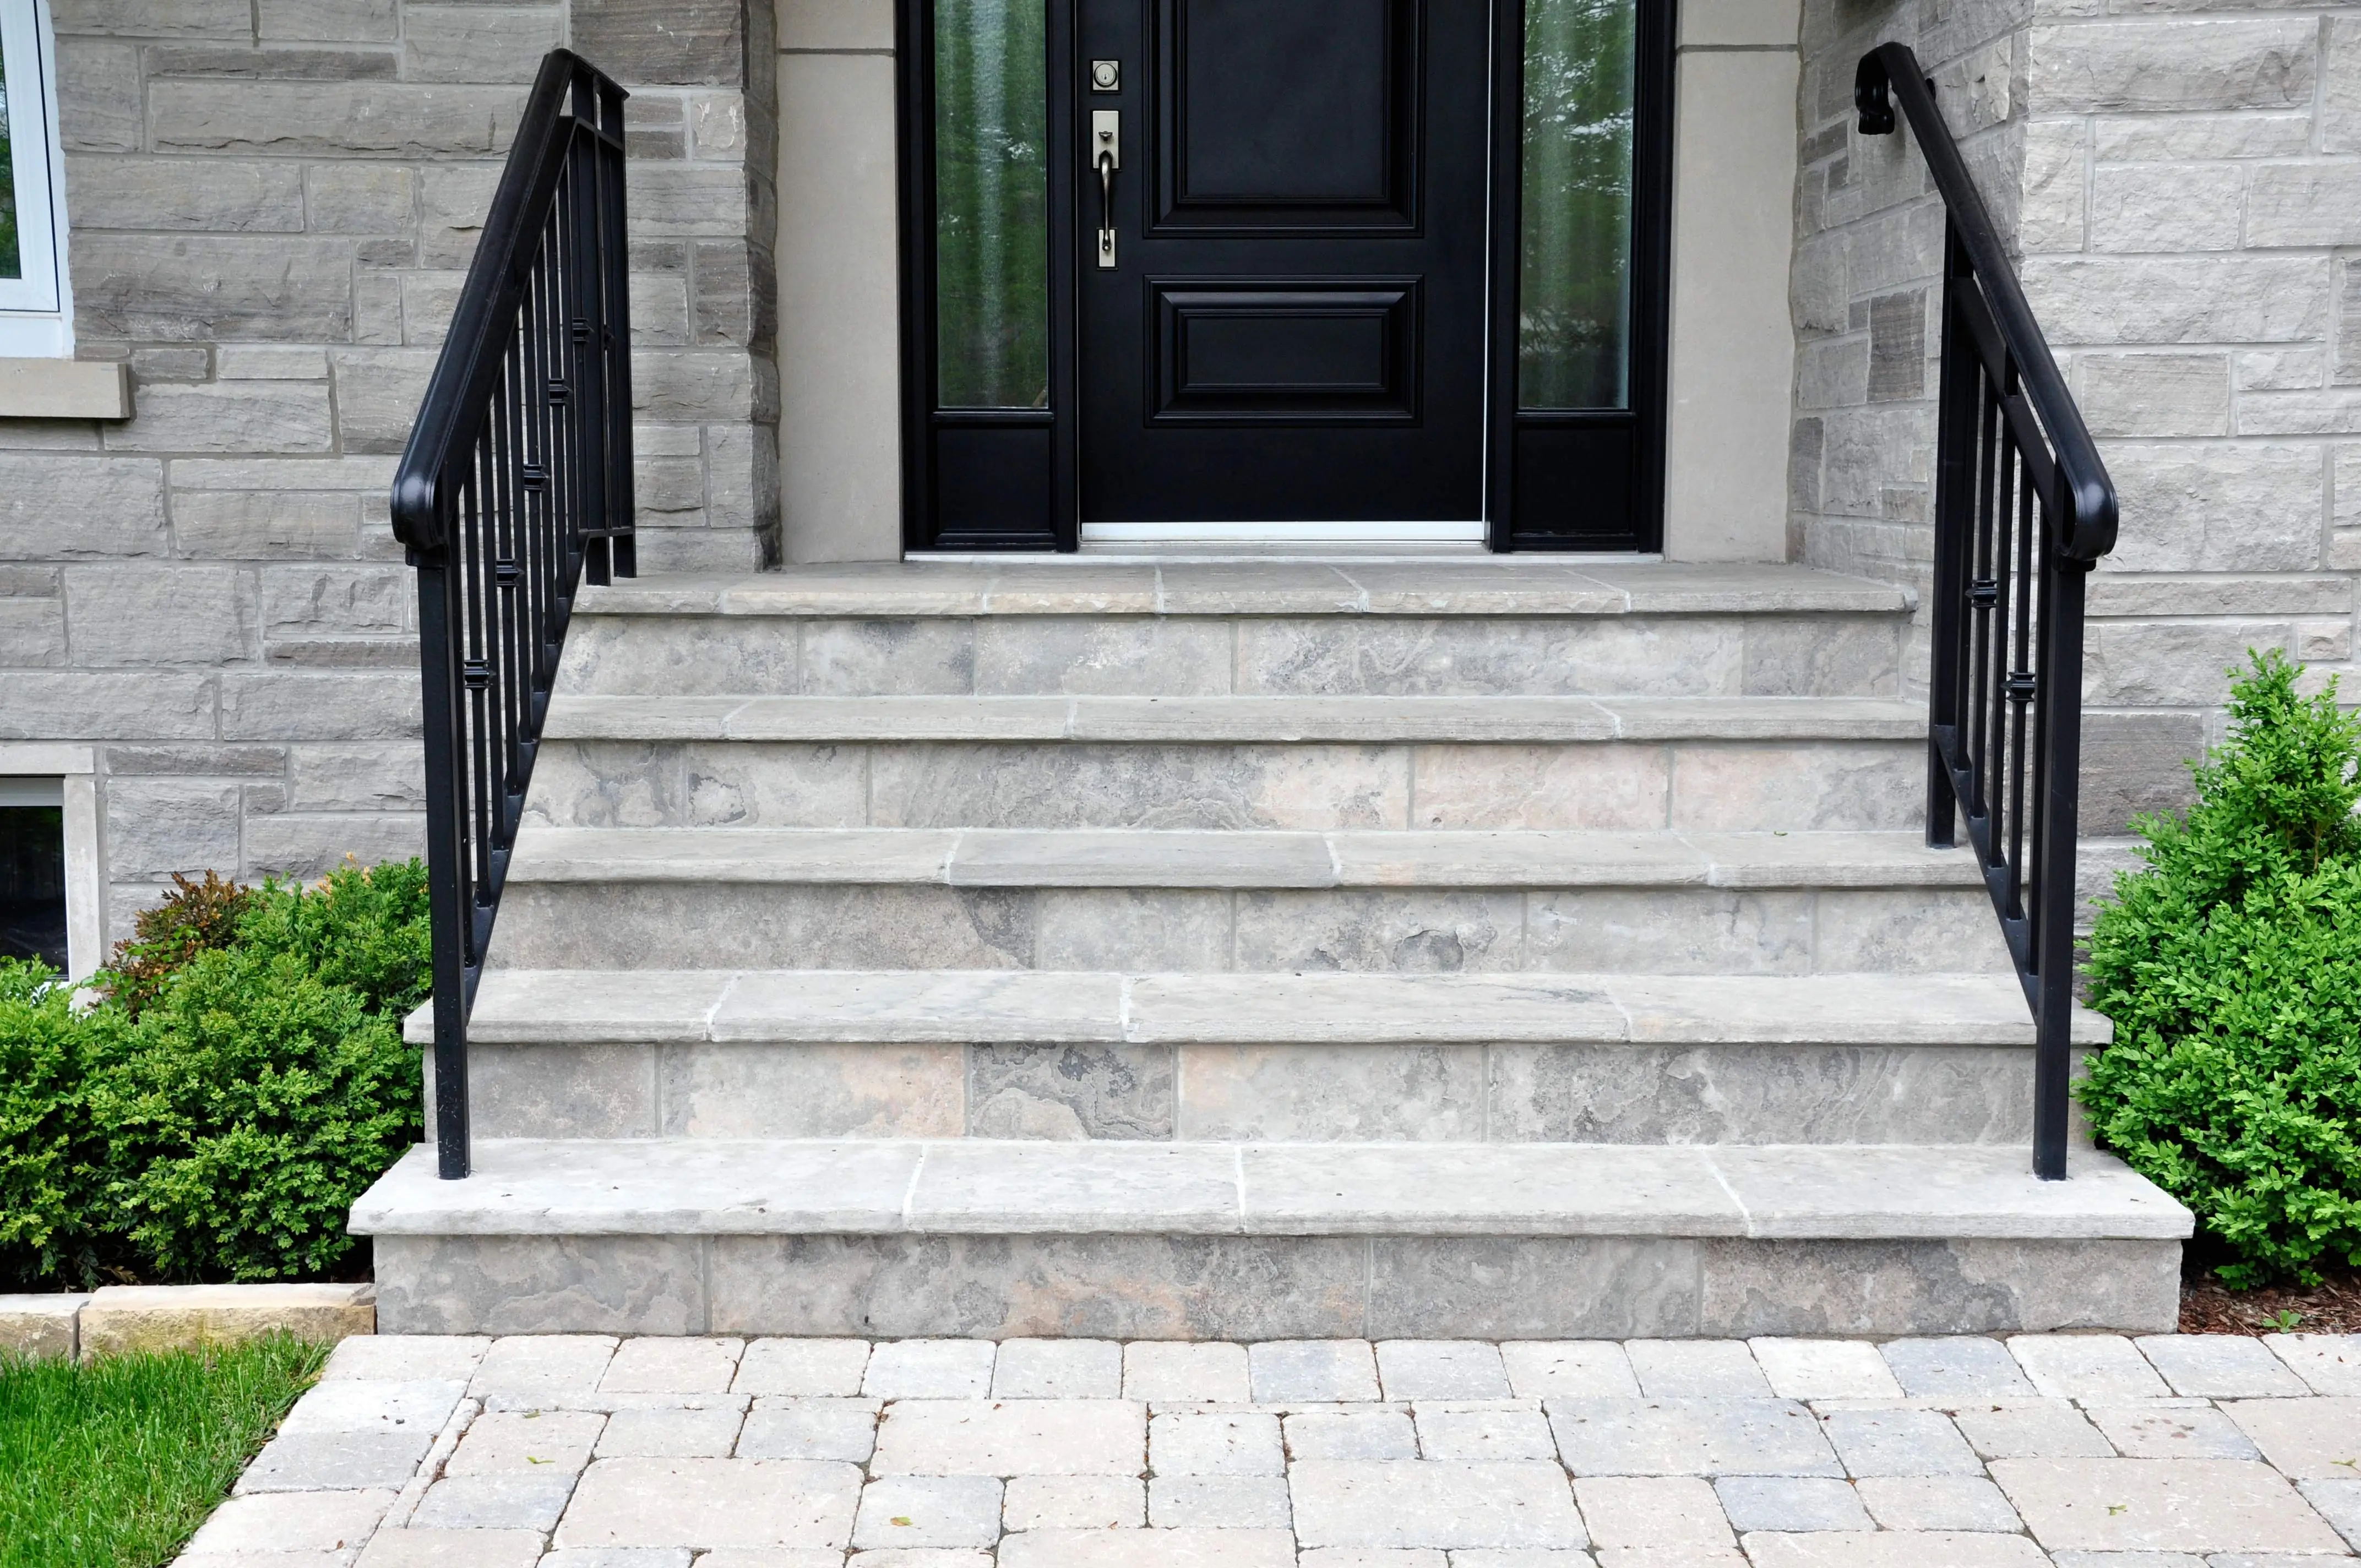 Newly constructed stone steps with black metal railings leading to a front door in Chestnut Hill.